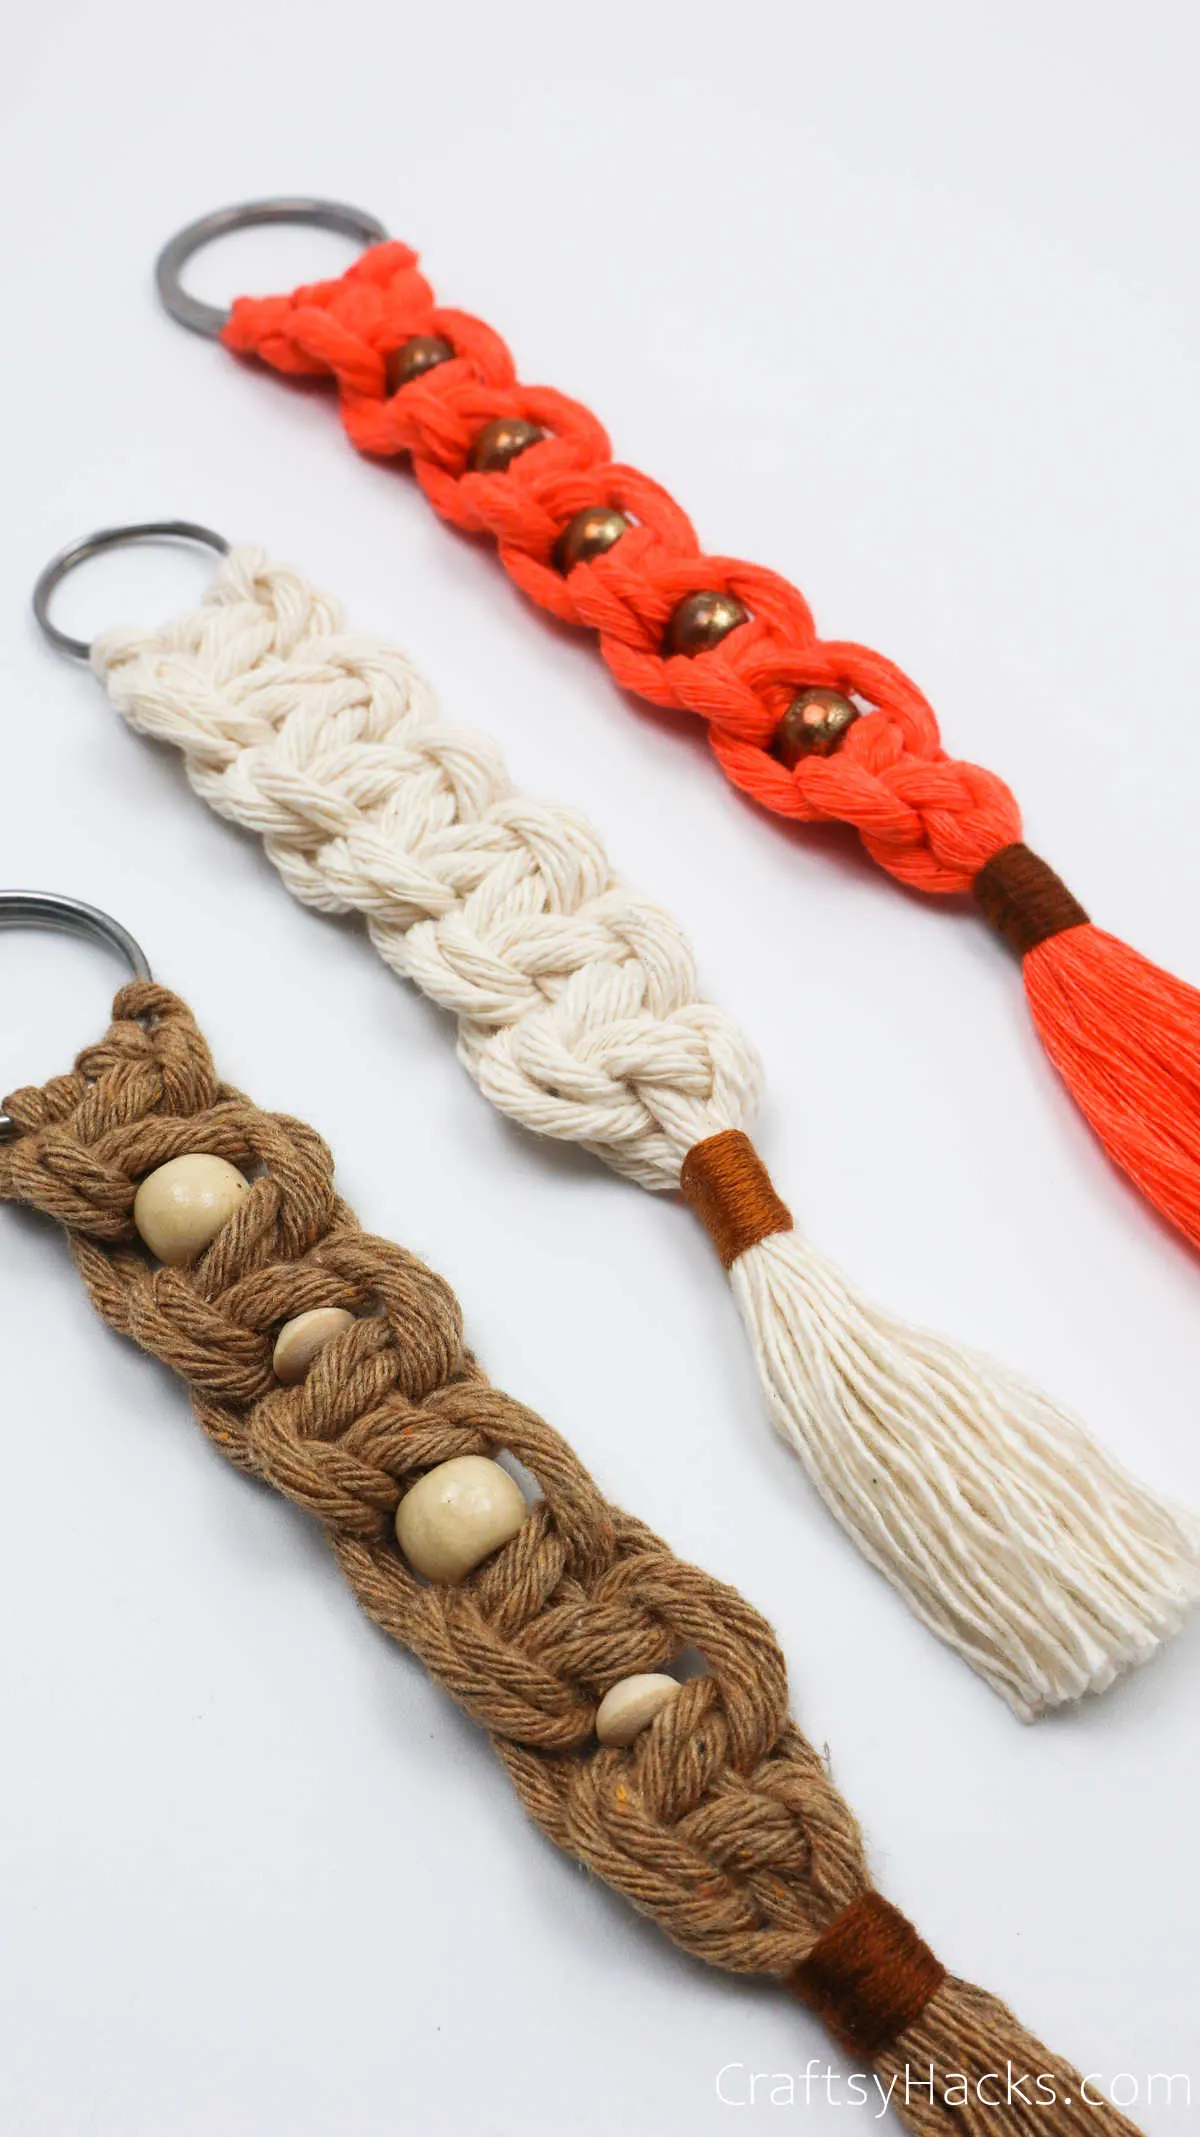 completed macrame keychains